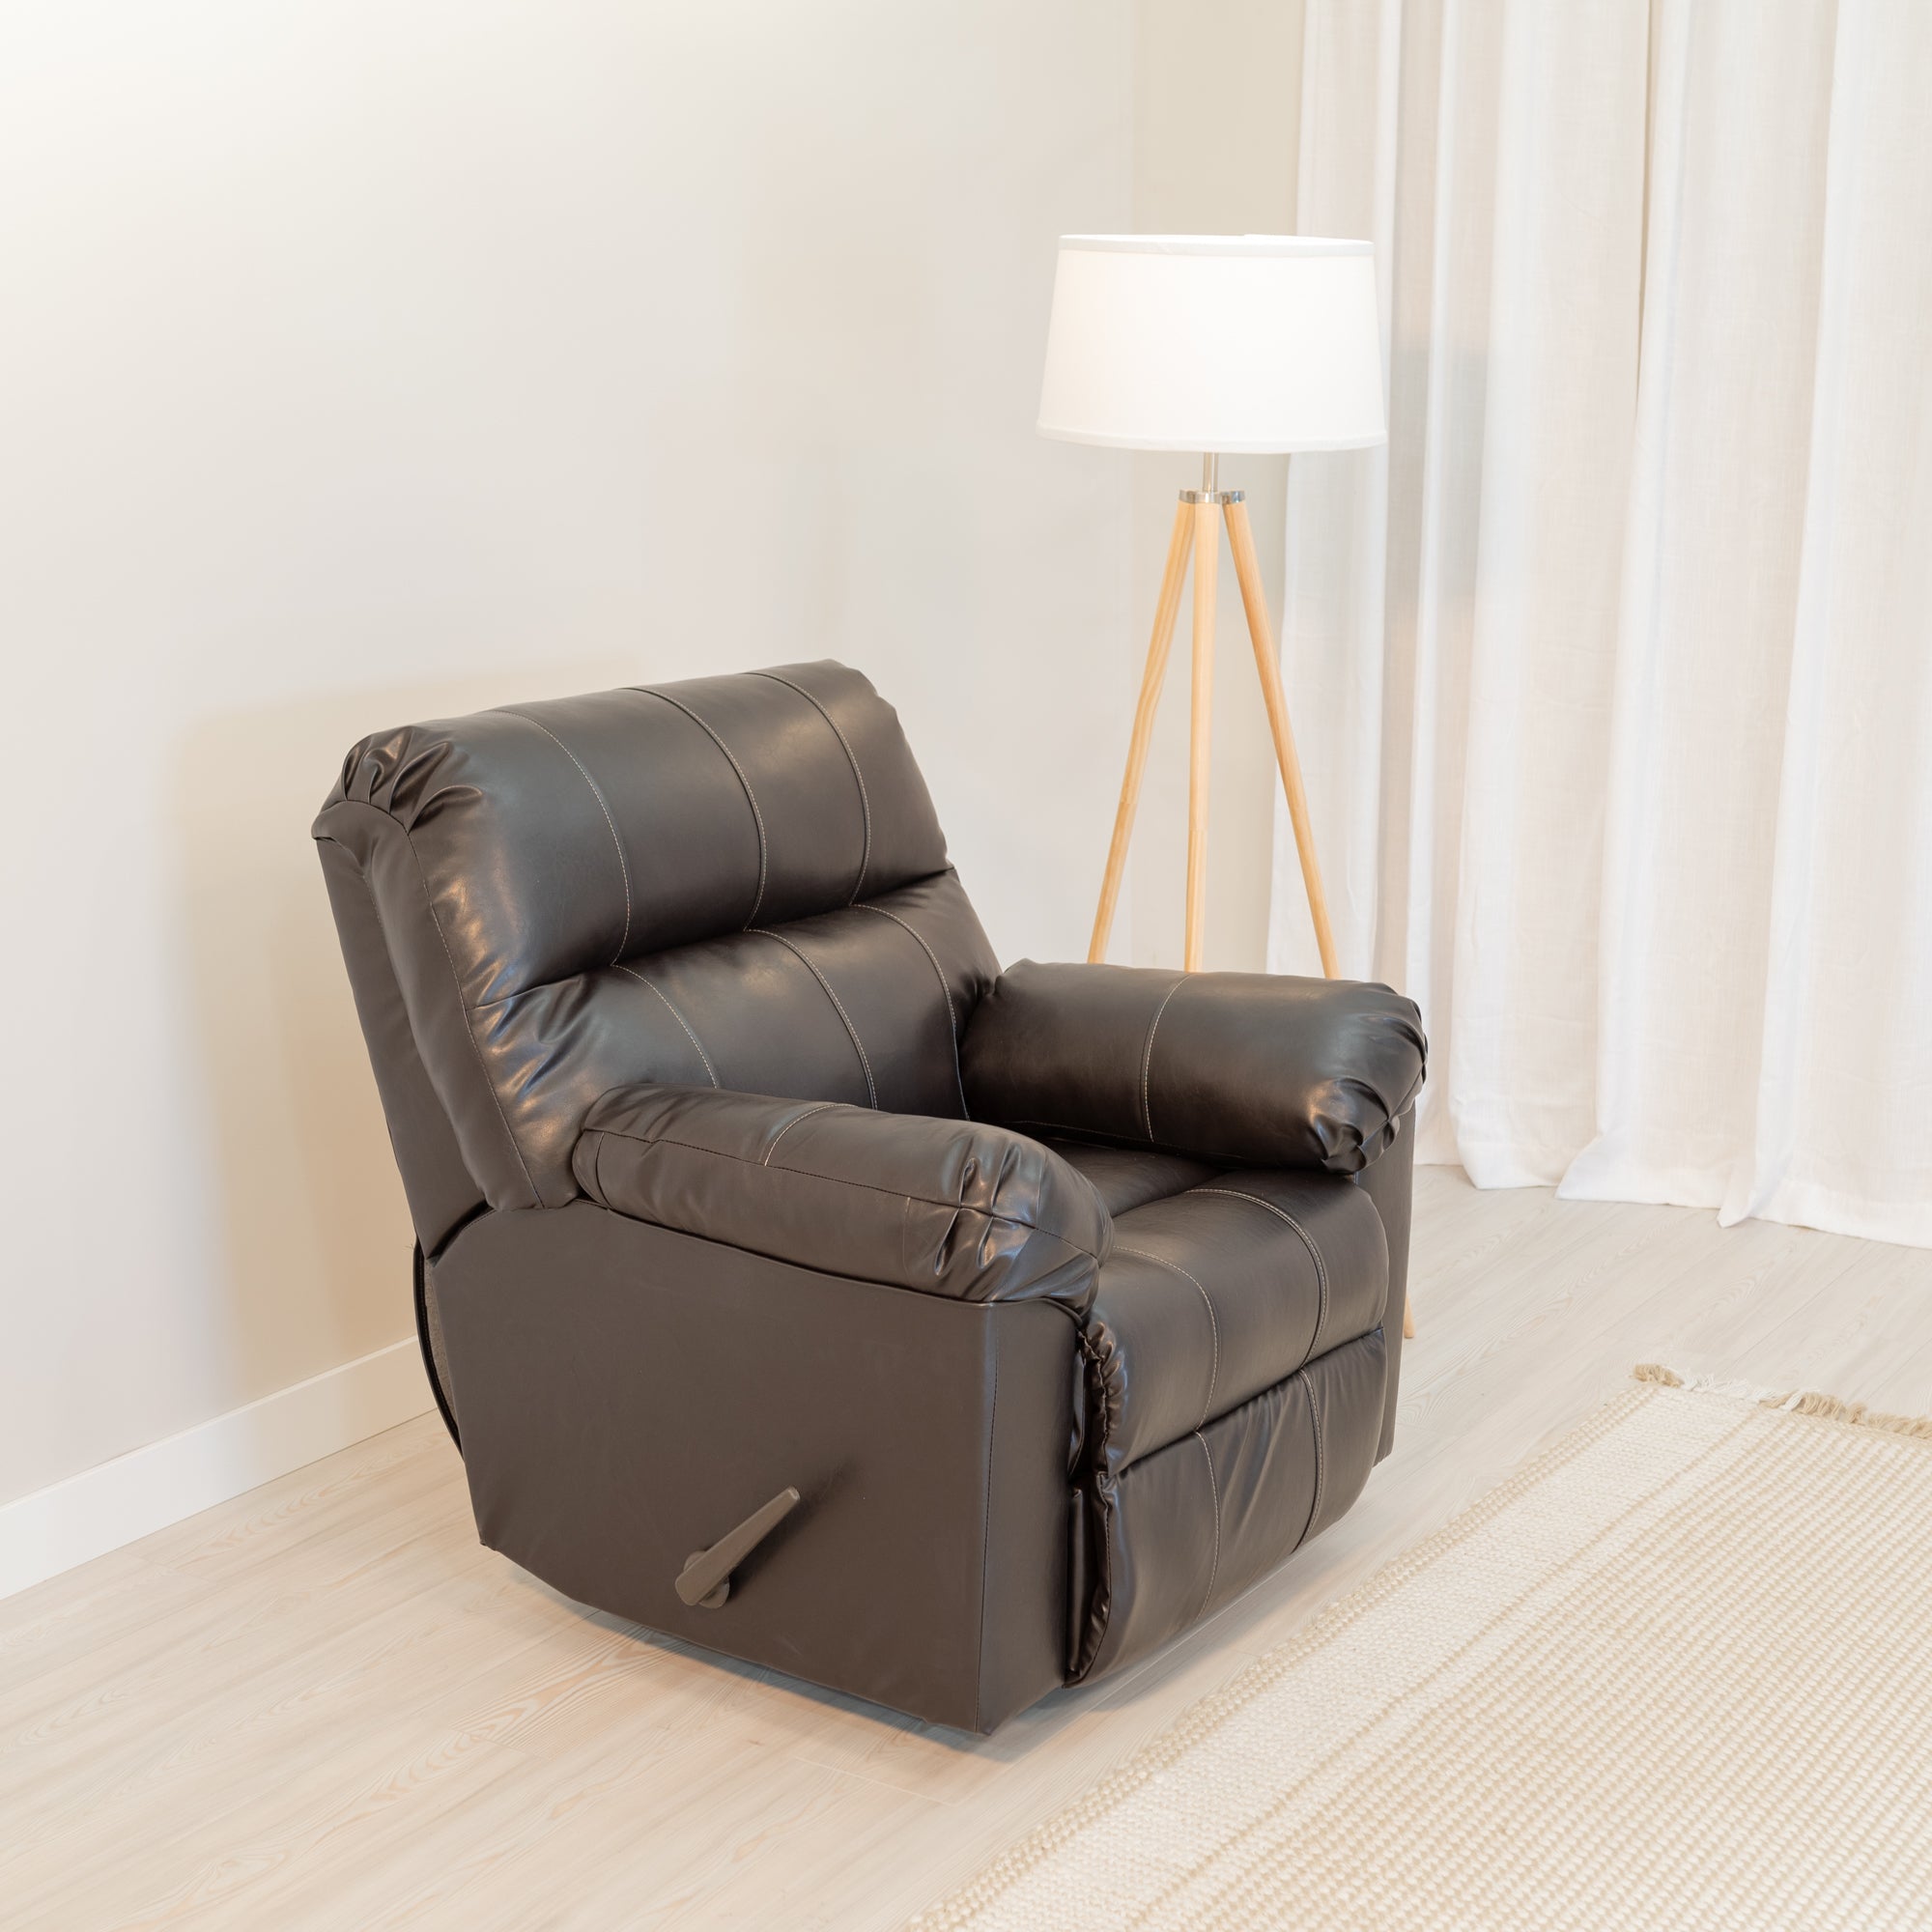 Addington Co Ashbourne Recliner with Vegan Leather and Manual Controls